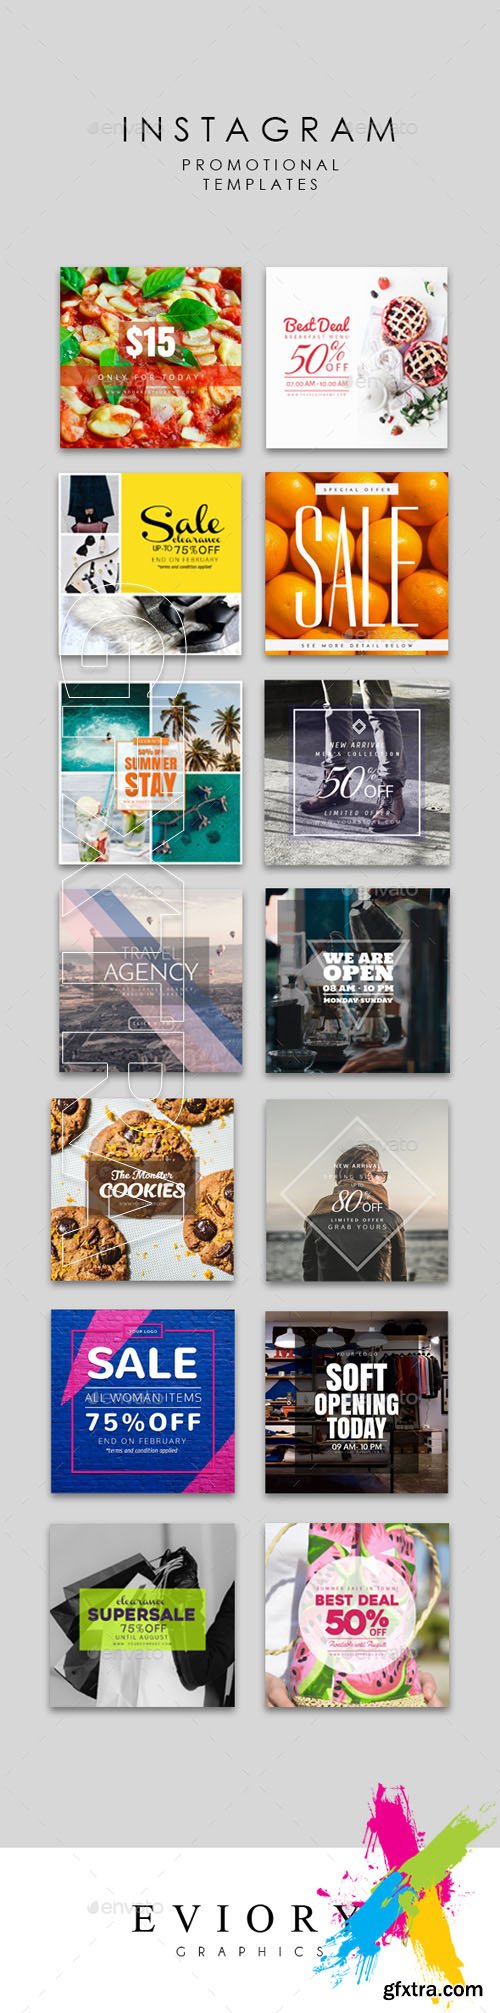 GraphicRiver - Instagram Promotional Templates 20417618